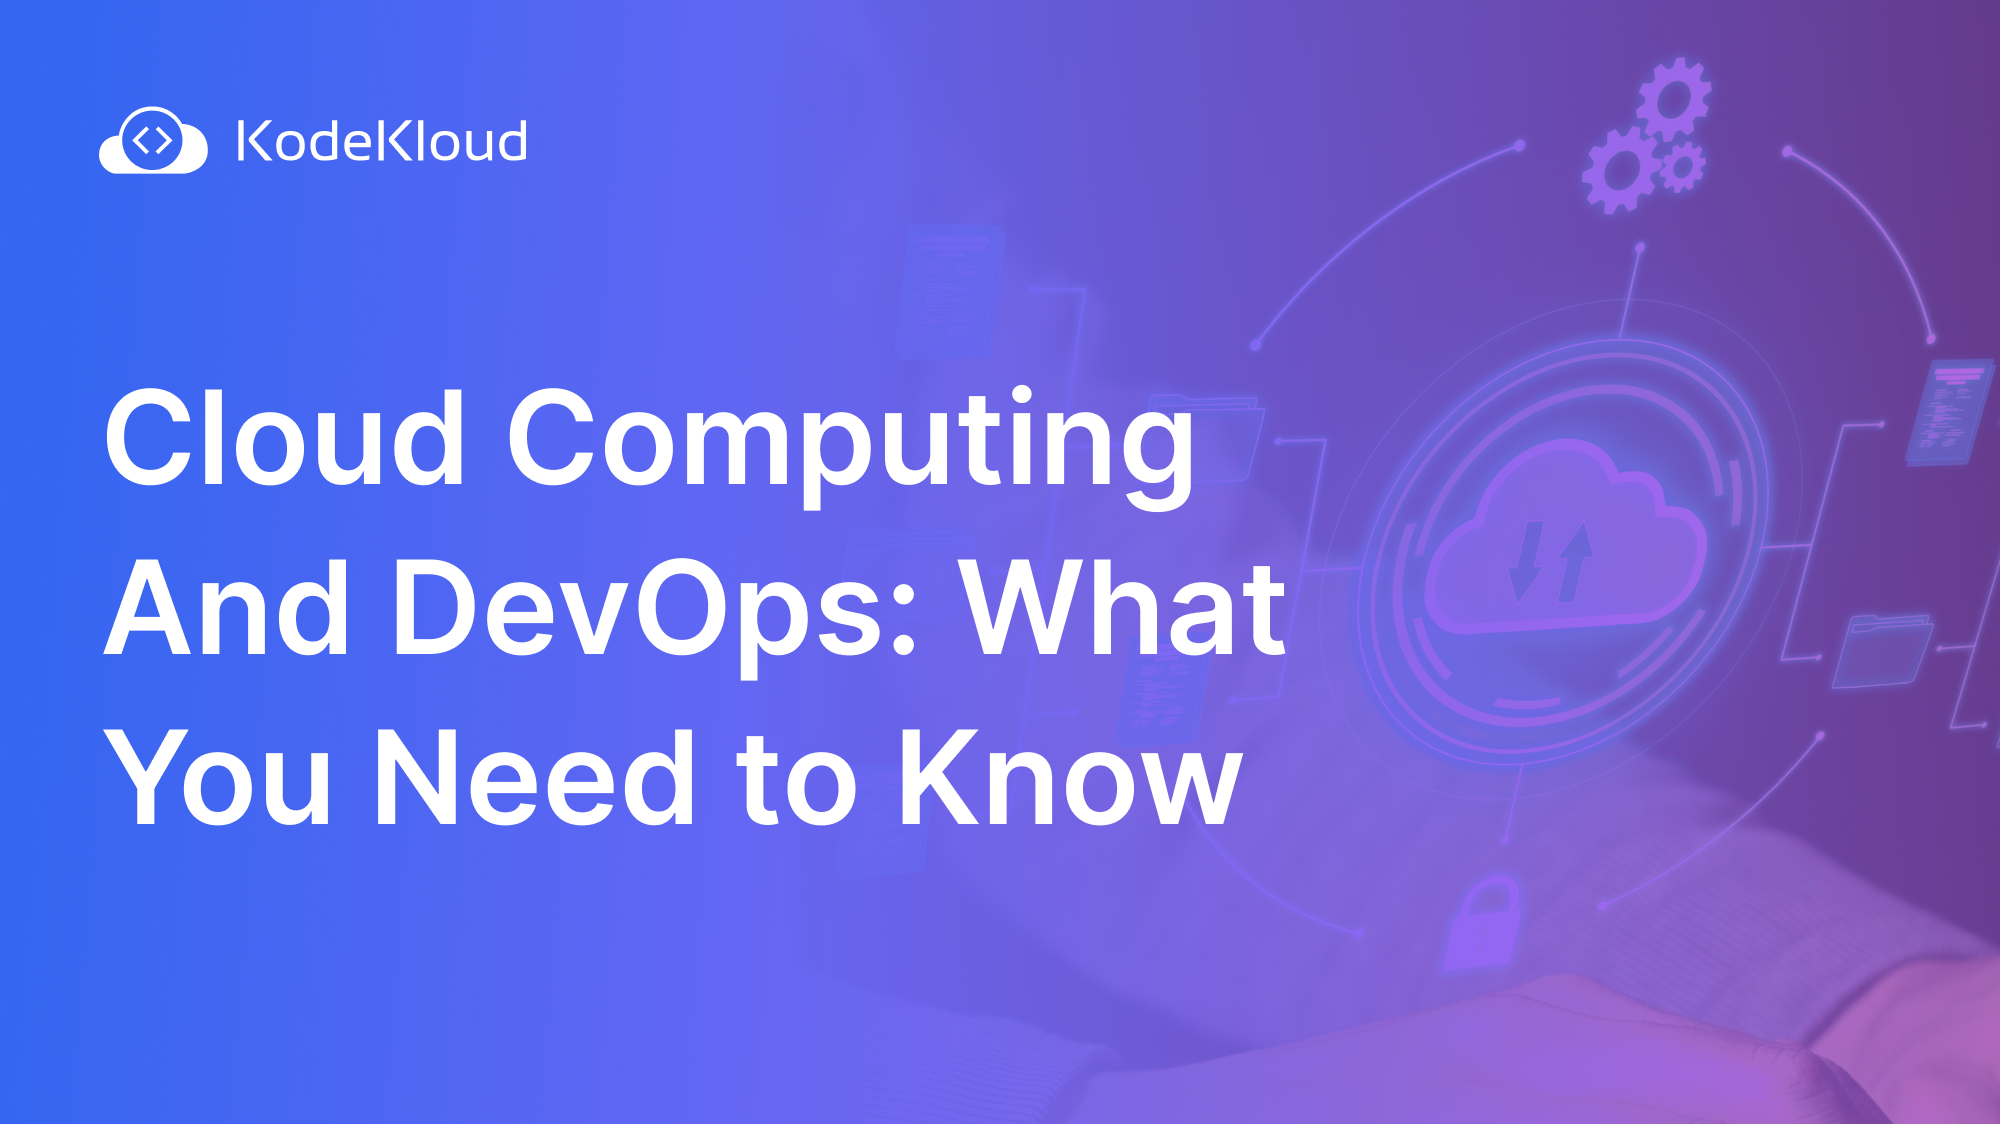 Cloud Computing And DevOps: What You Need to Know